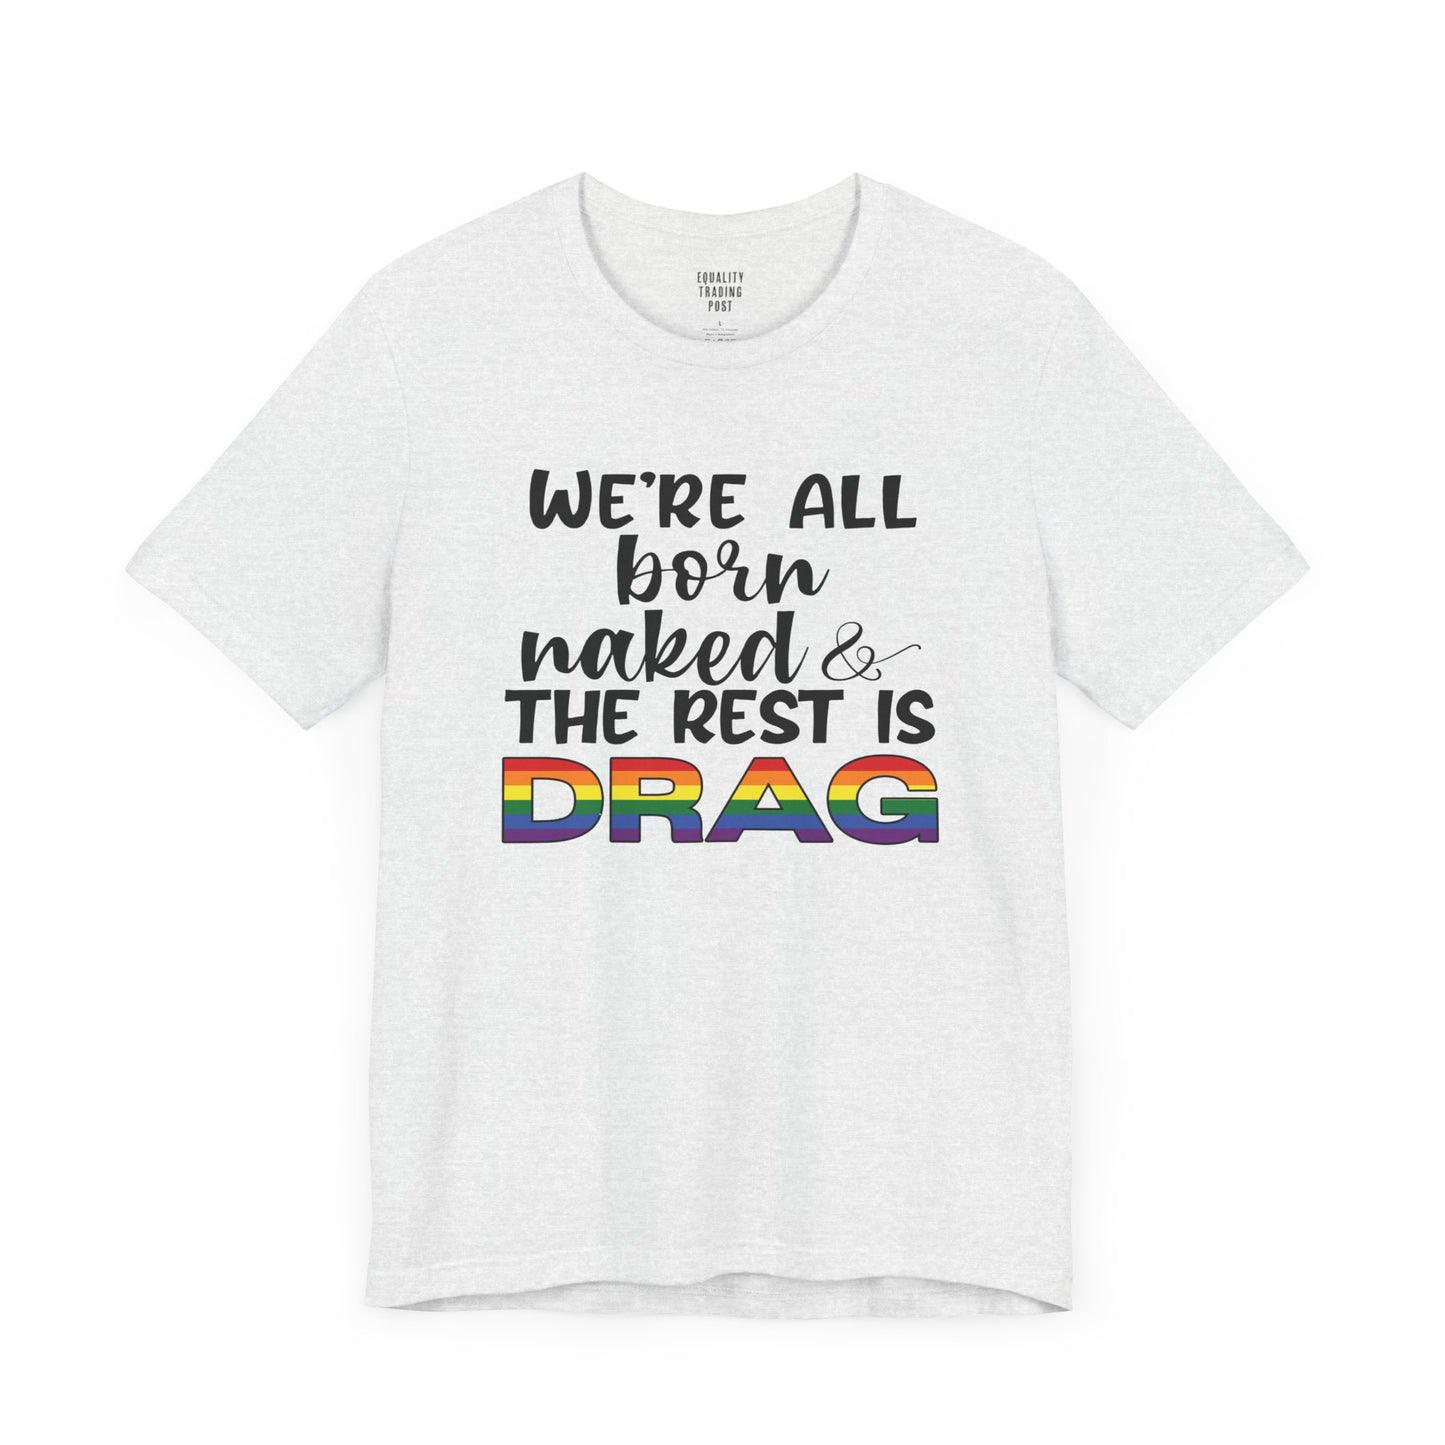 The Rest Is Drag Tee